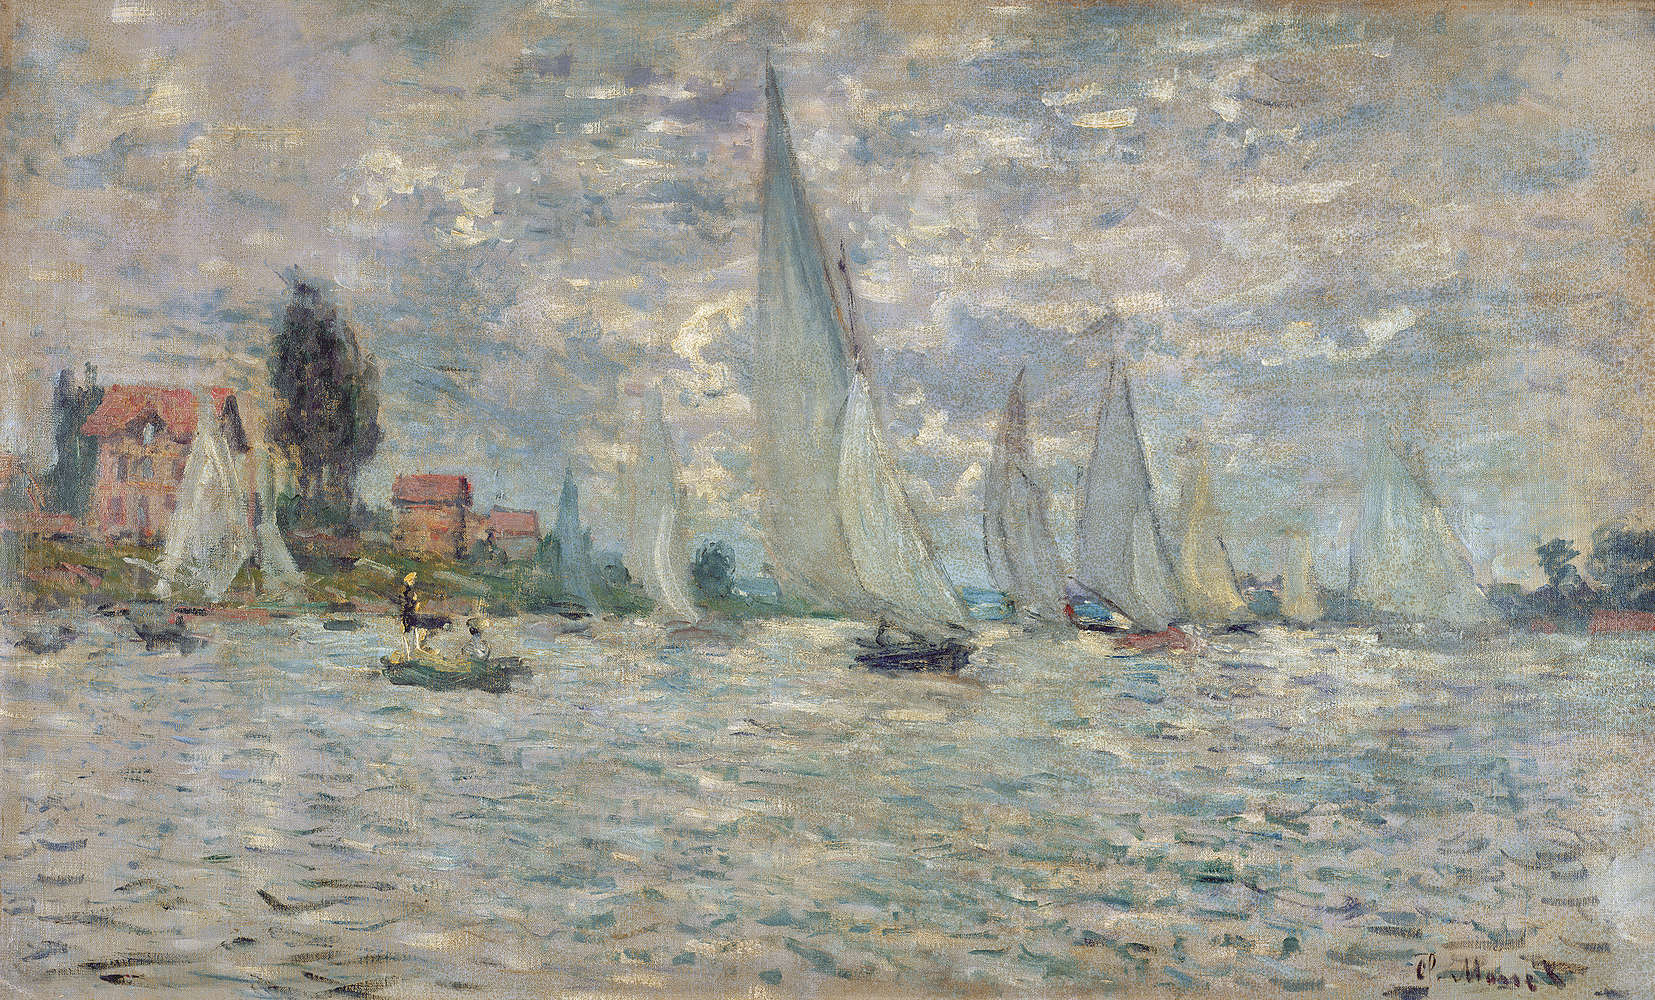             Photo wallpaper "The boats or the regatta in Argenteuil" by Claude Monet
        